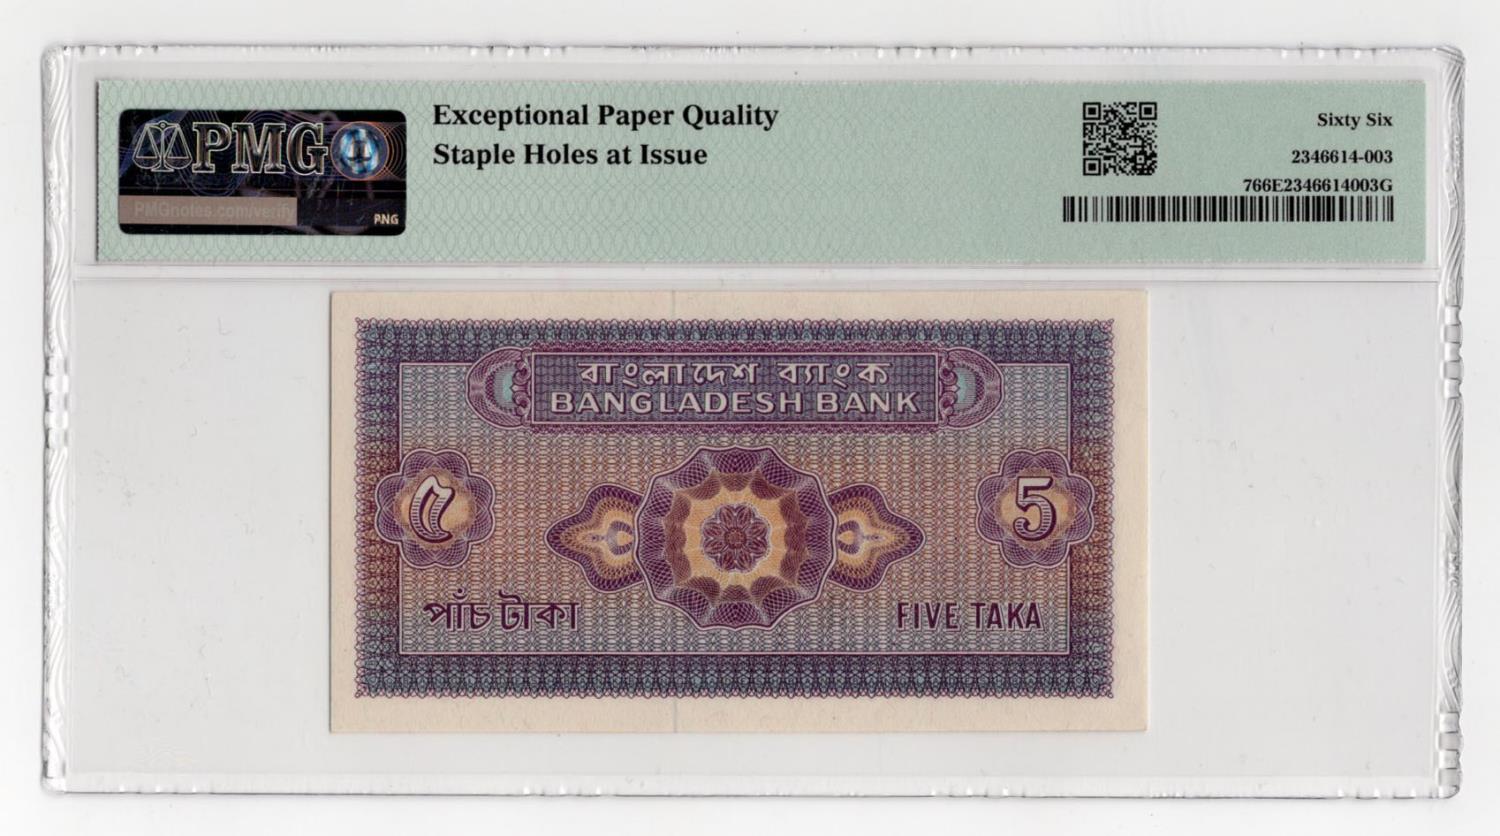 Bangladesh 5 Taka issued 1972, serial A/4 115072 (BNB B301a, Pick7) in PMG holder graded 66 EPQ - Image 2 of 2